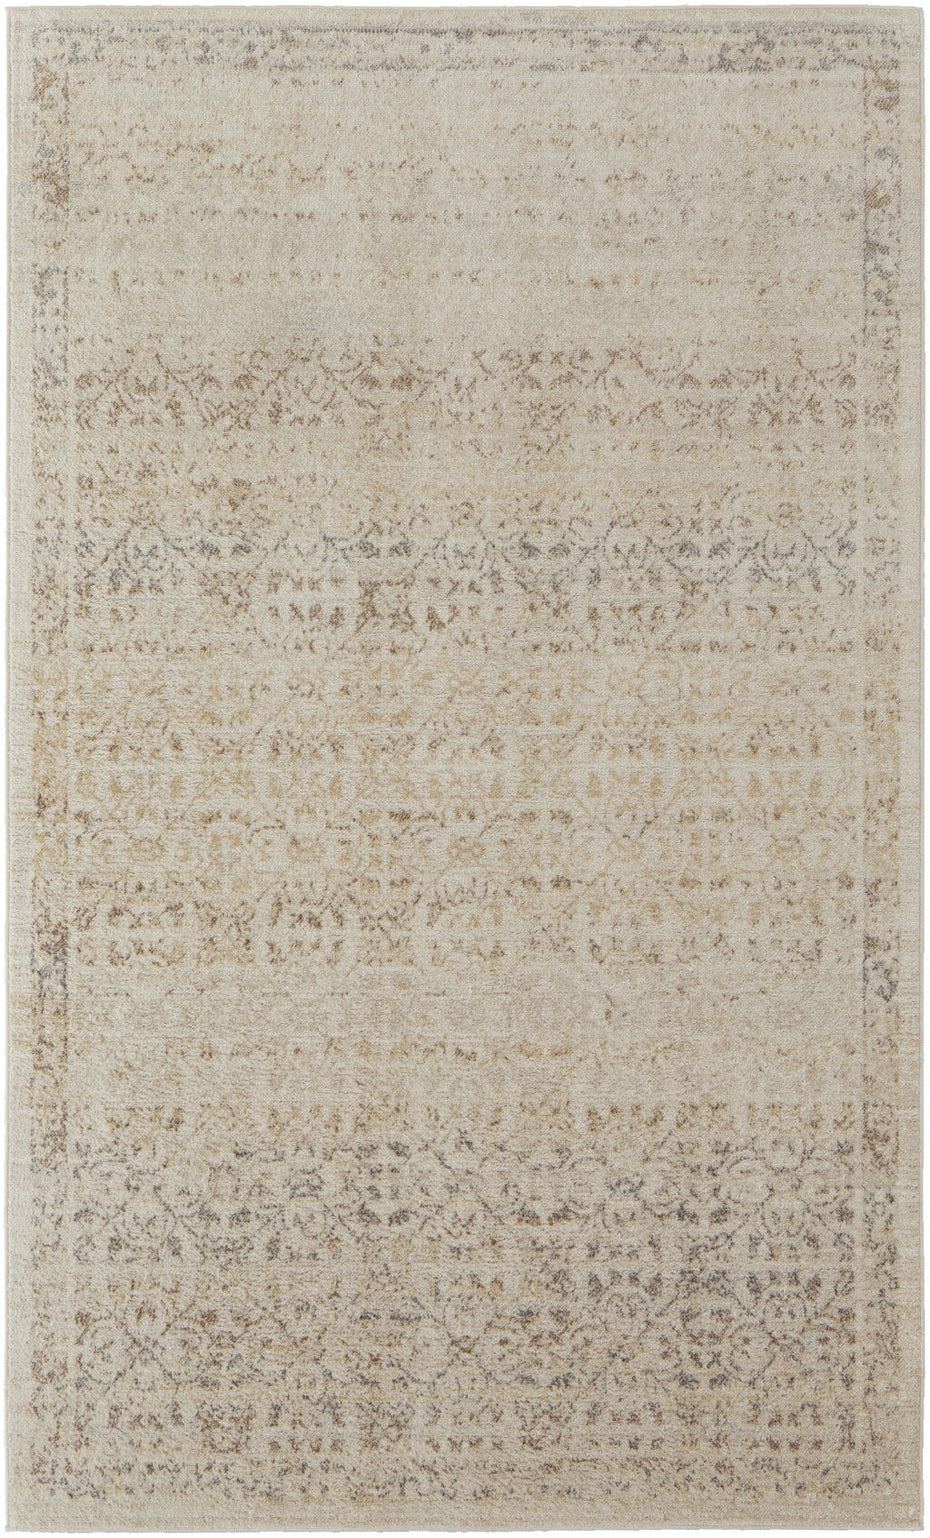 Abstract Power Loom Distressed Area Rug - Ivory Tan And Gray - 4' X 6'